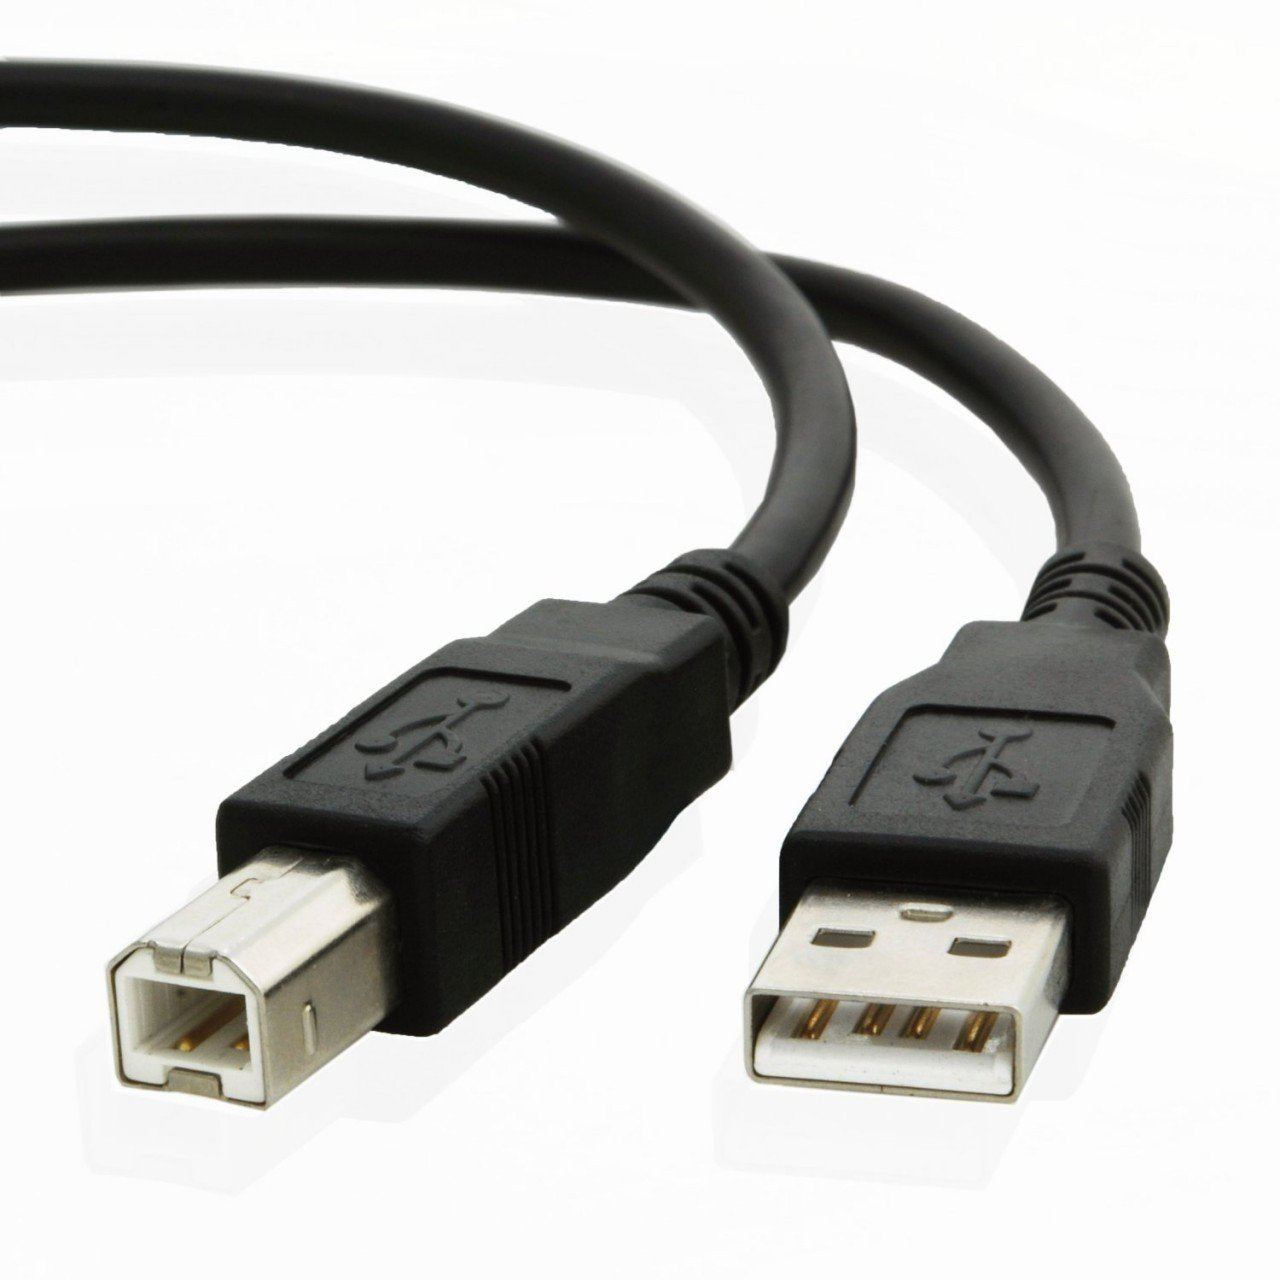 USB cable for Mxl USB.009